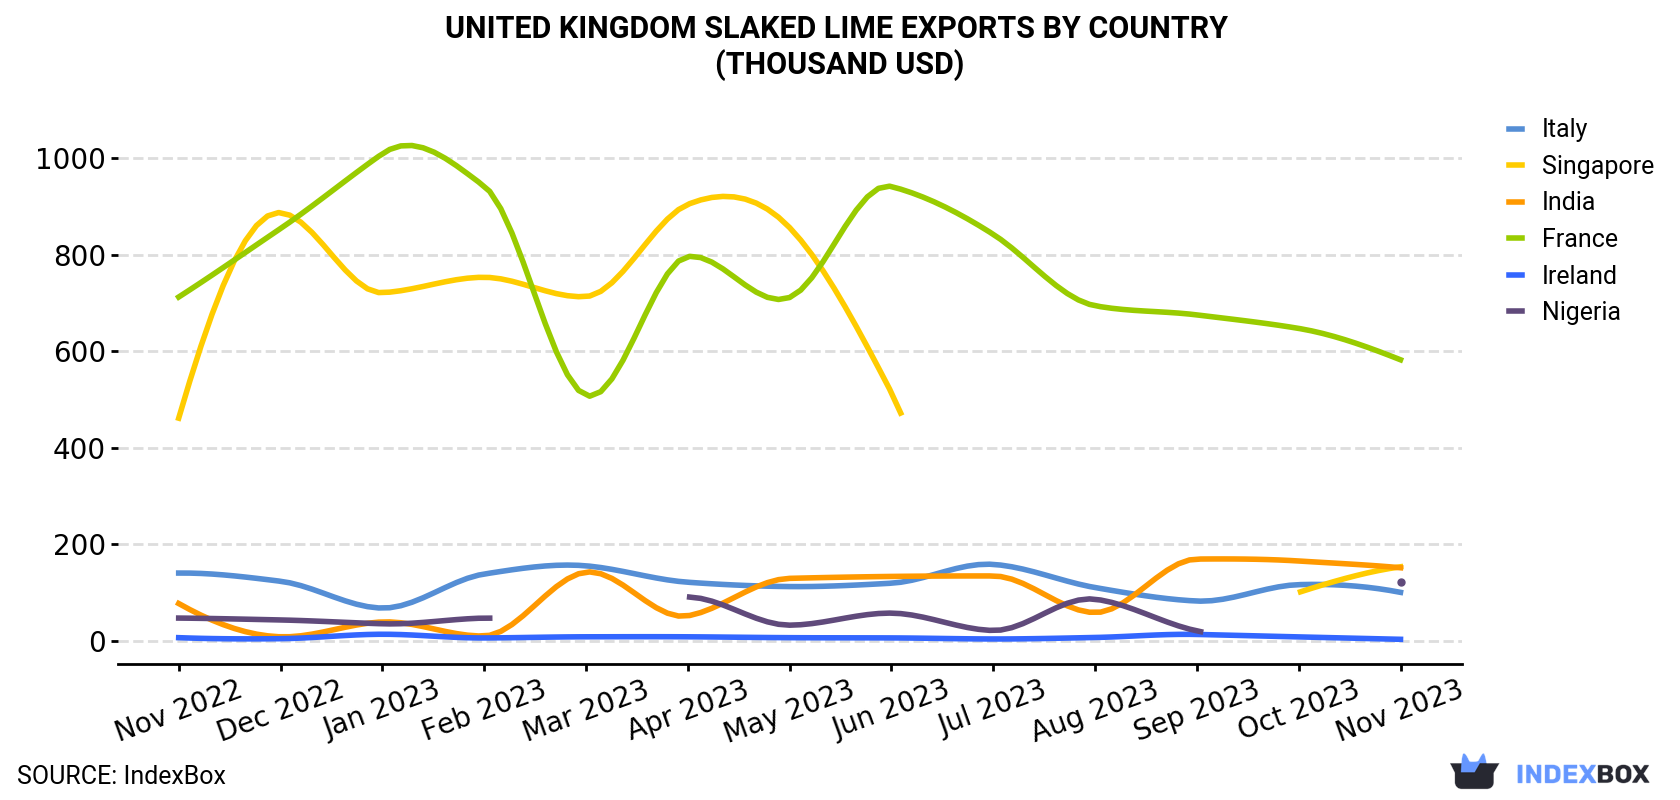 United Kingdom Slaked lime Exports By Country (Thousand USD)